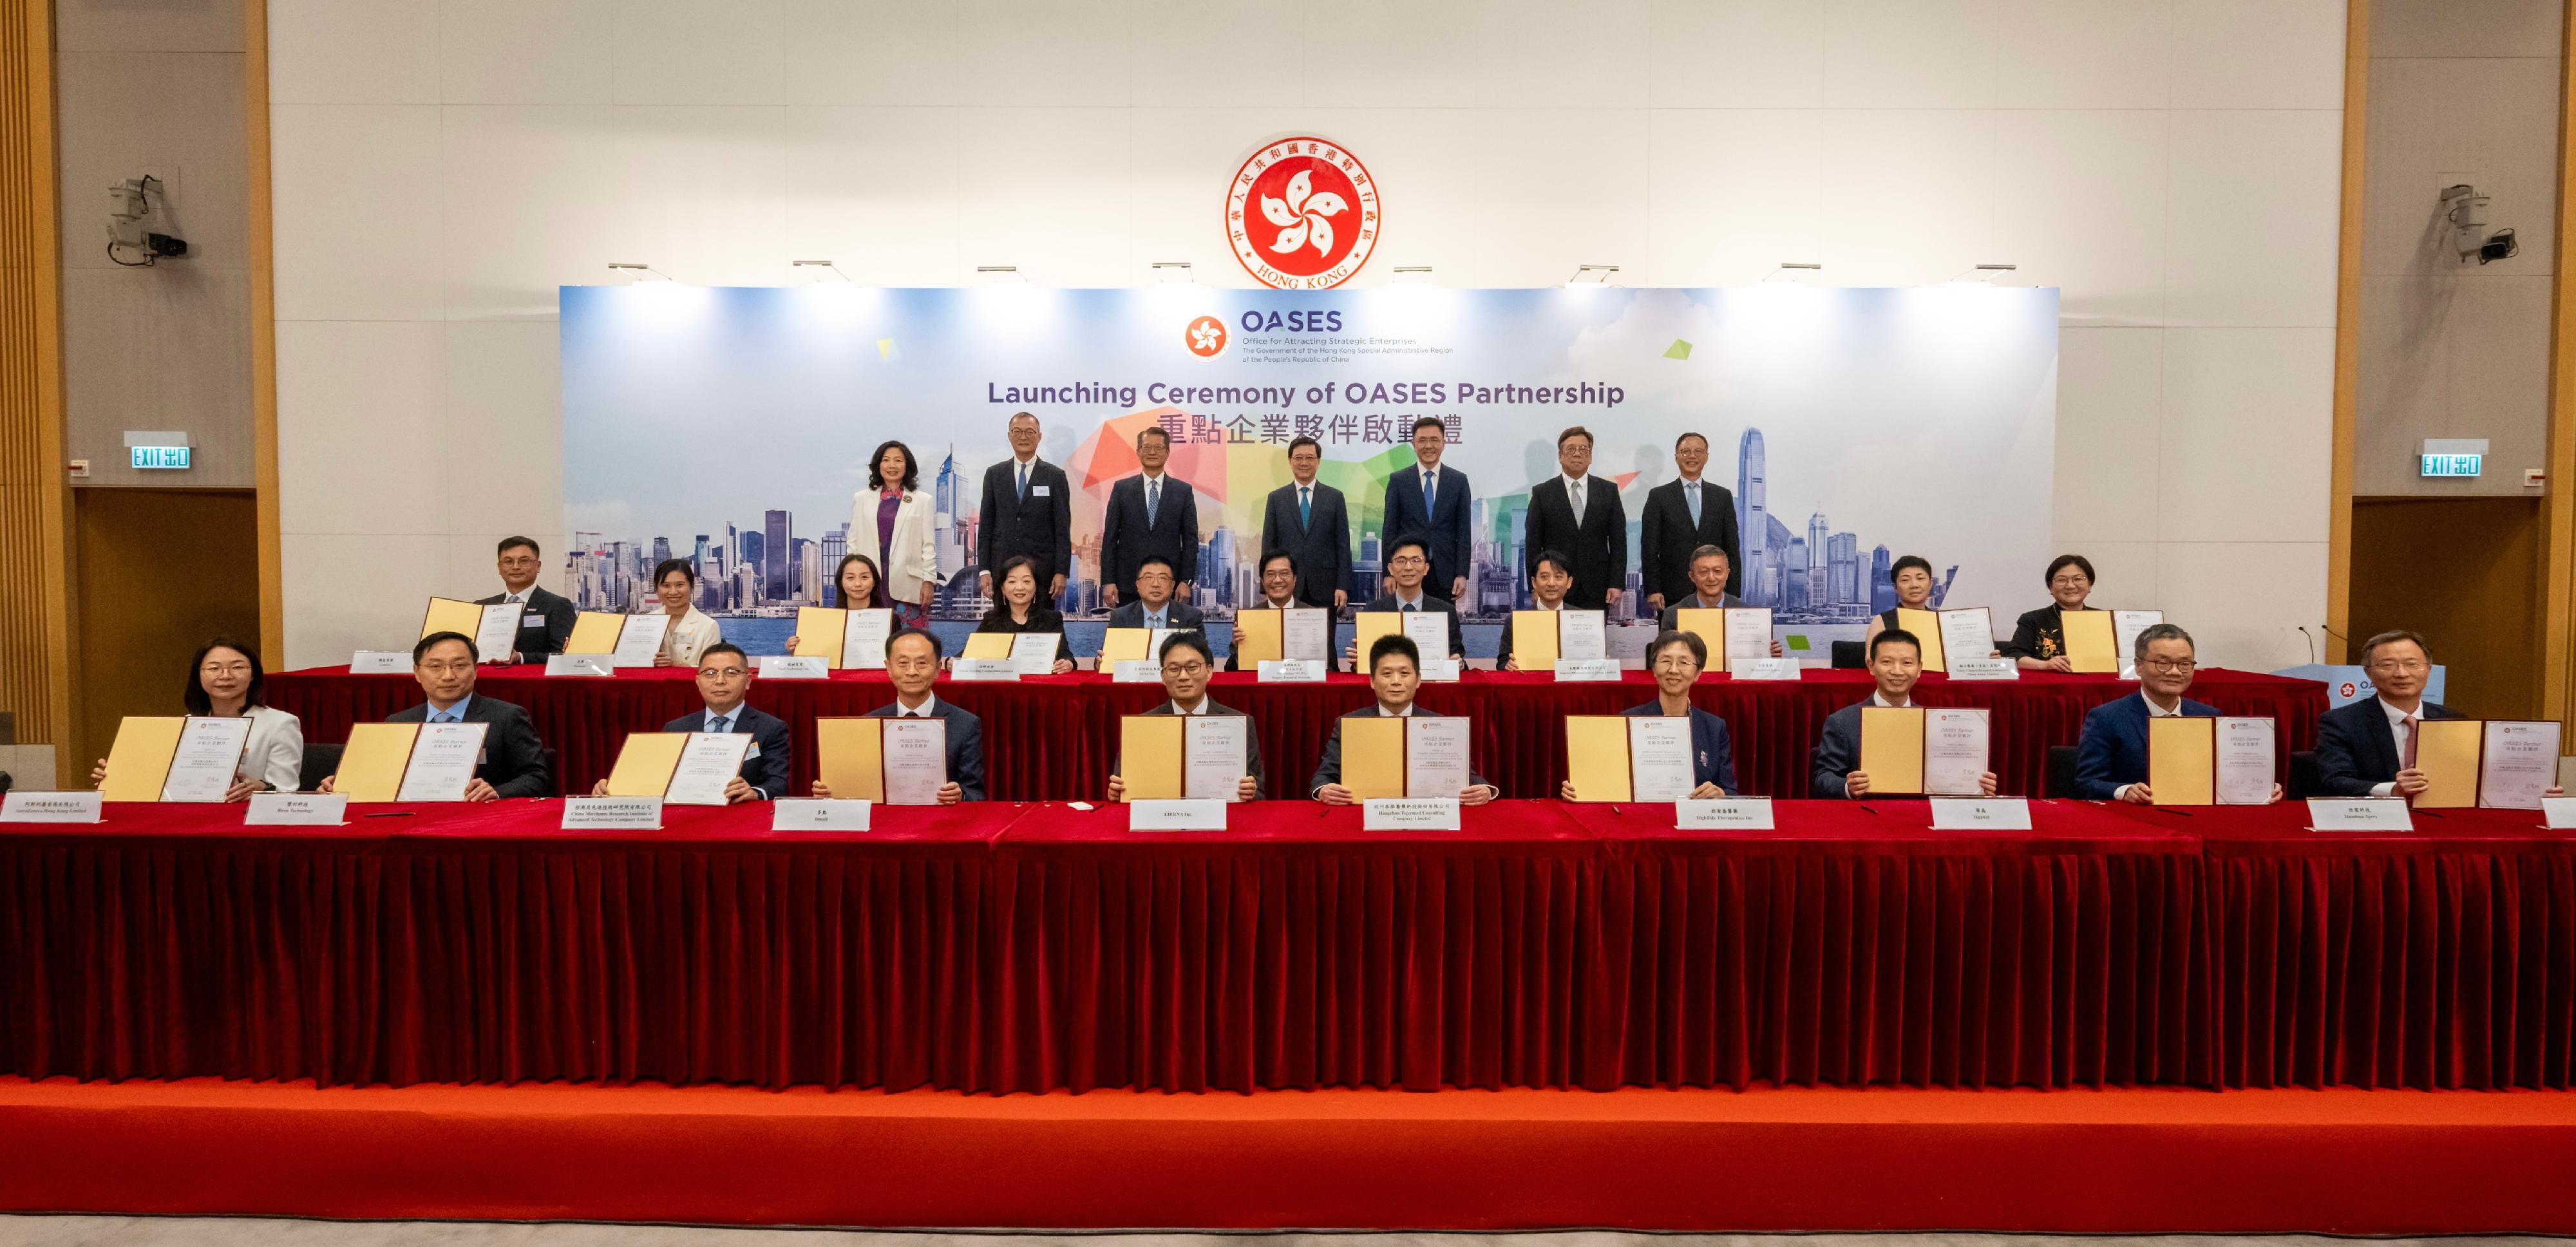 The Office for Attracting Strategic Enterprises (OASES) held the Launching Ceremony of OASES Partnership today (October 4). Photo shows OASES signing a partnership agreement with the first batch of strategic enterprises setting up or expanding their businesses in Hong Kong. 